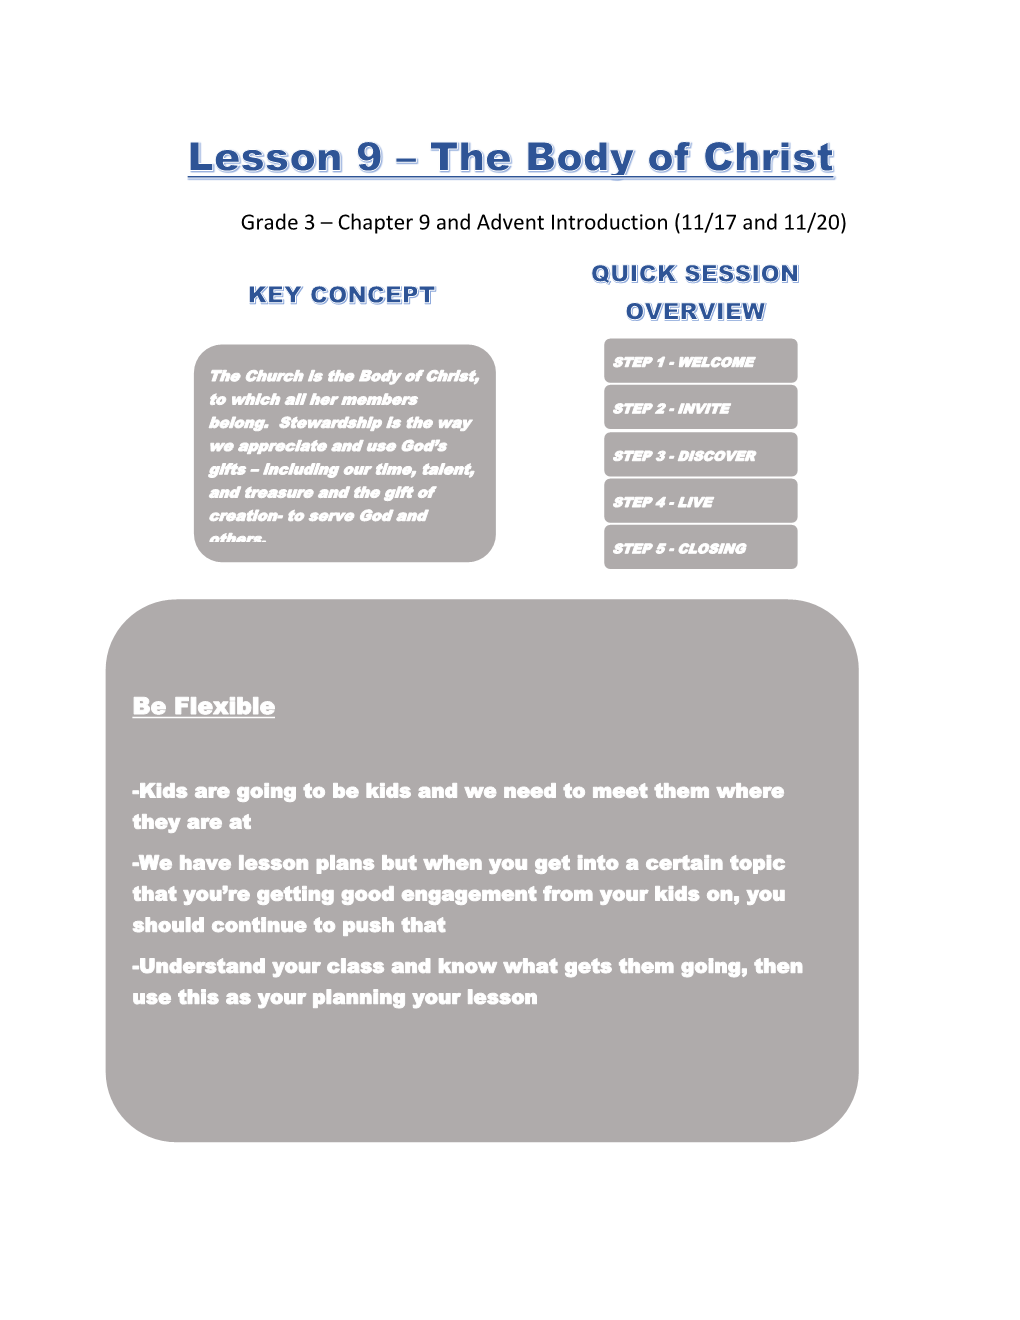 Grade 3 – Chapter 9 and Advent Introduction (11/17 and 11/20)